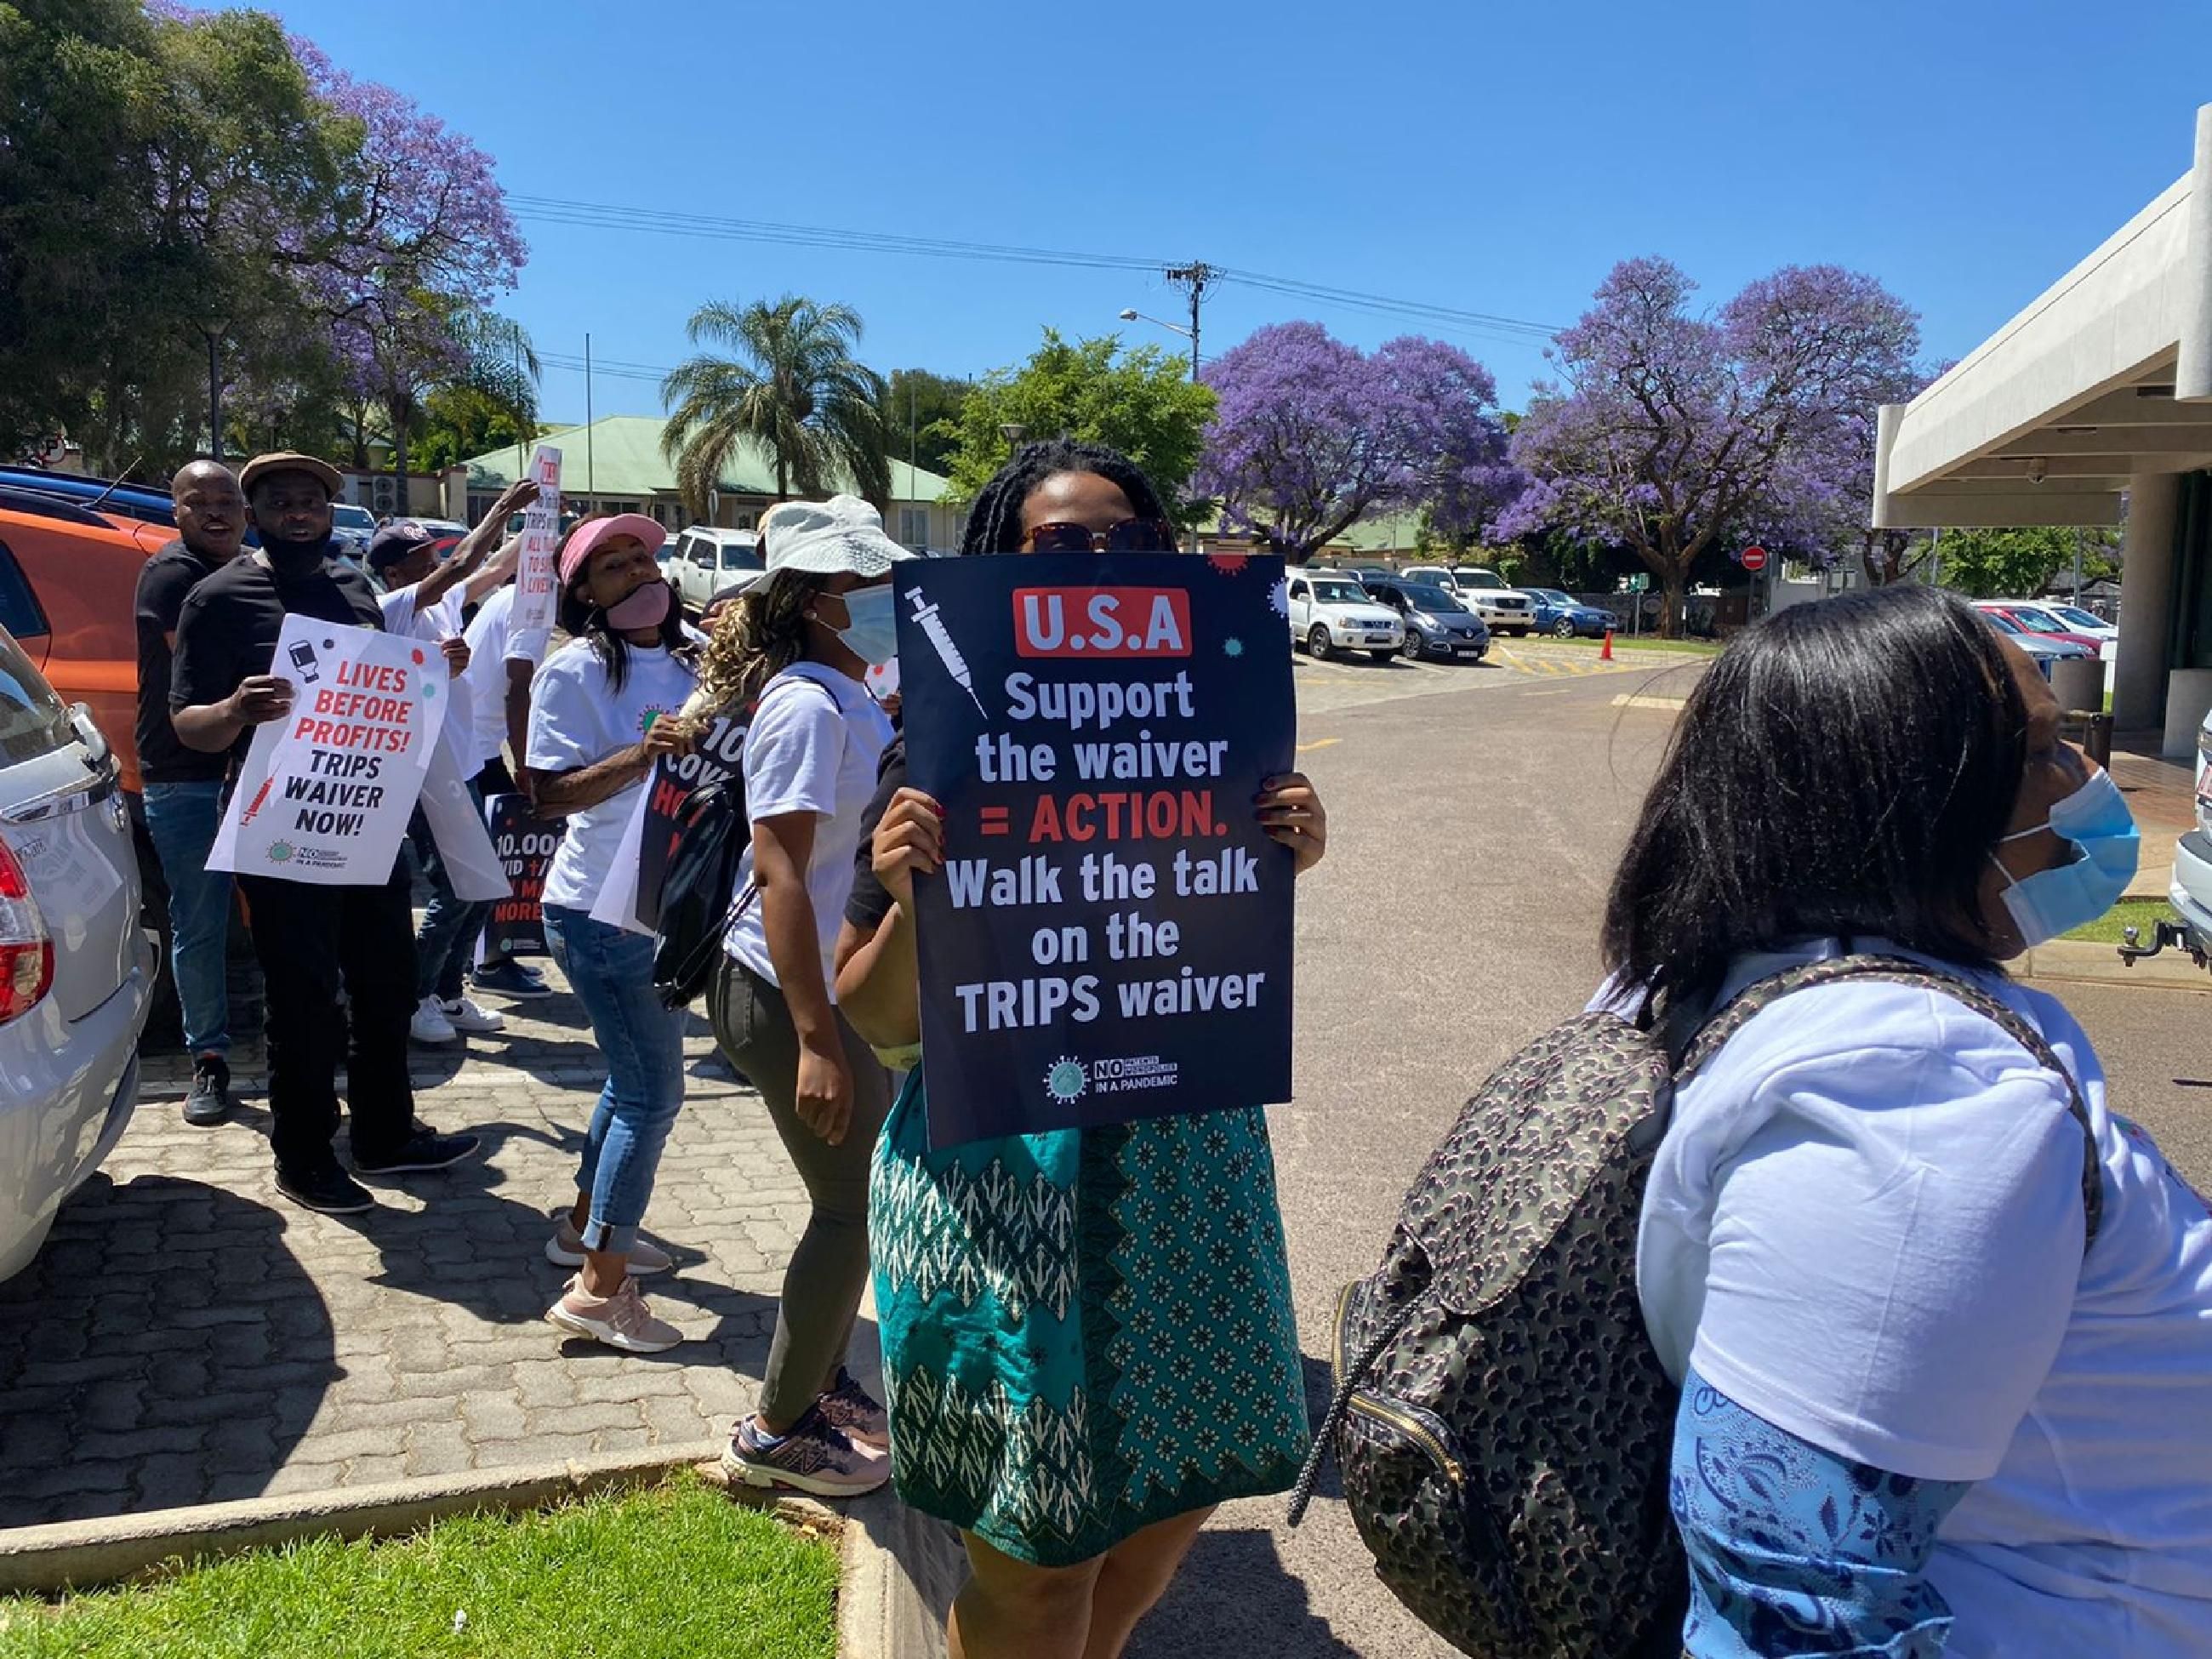 Demonstrators rally at the U.S. Embassy in South Africa